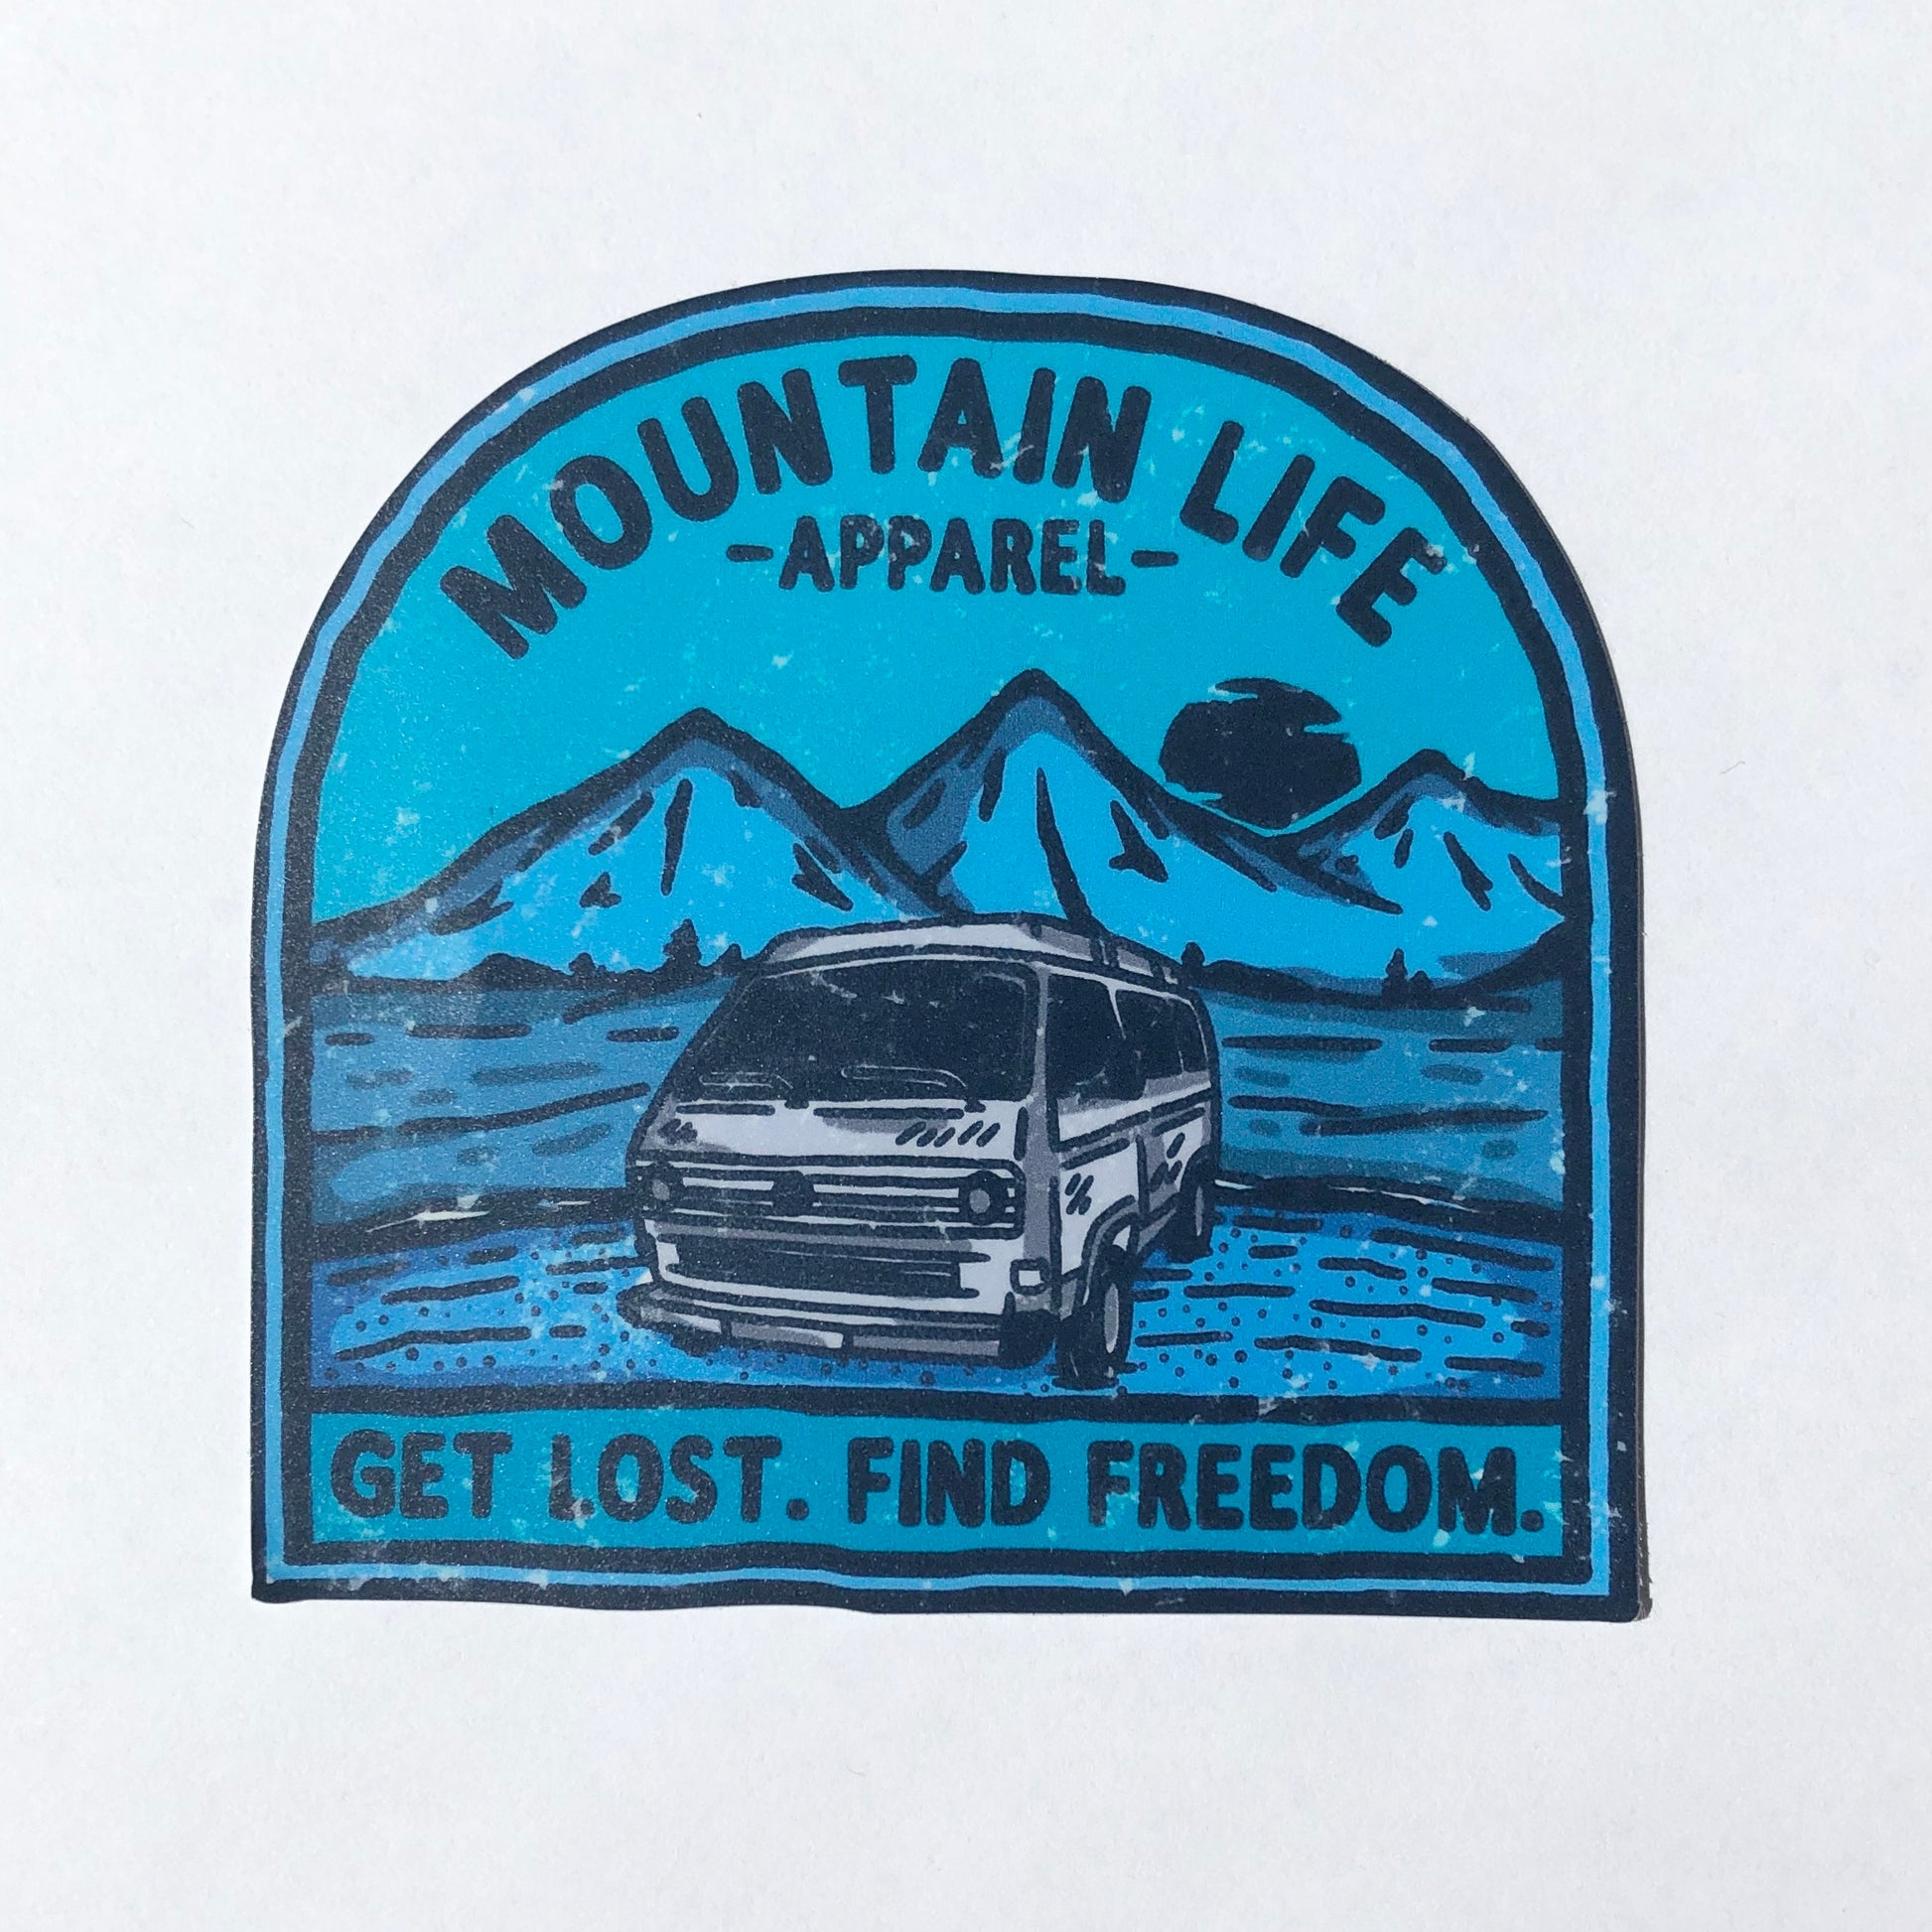 GET LOST. FIND FREEDOM. - Mountain Life Apparel - MTN LIFE